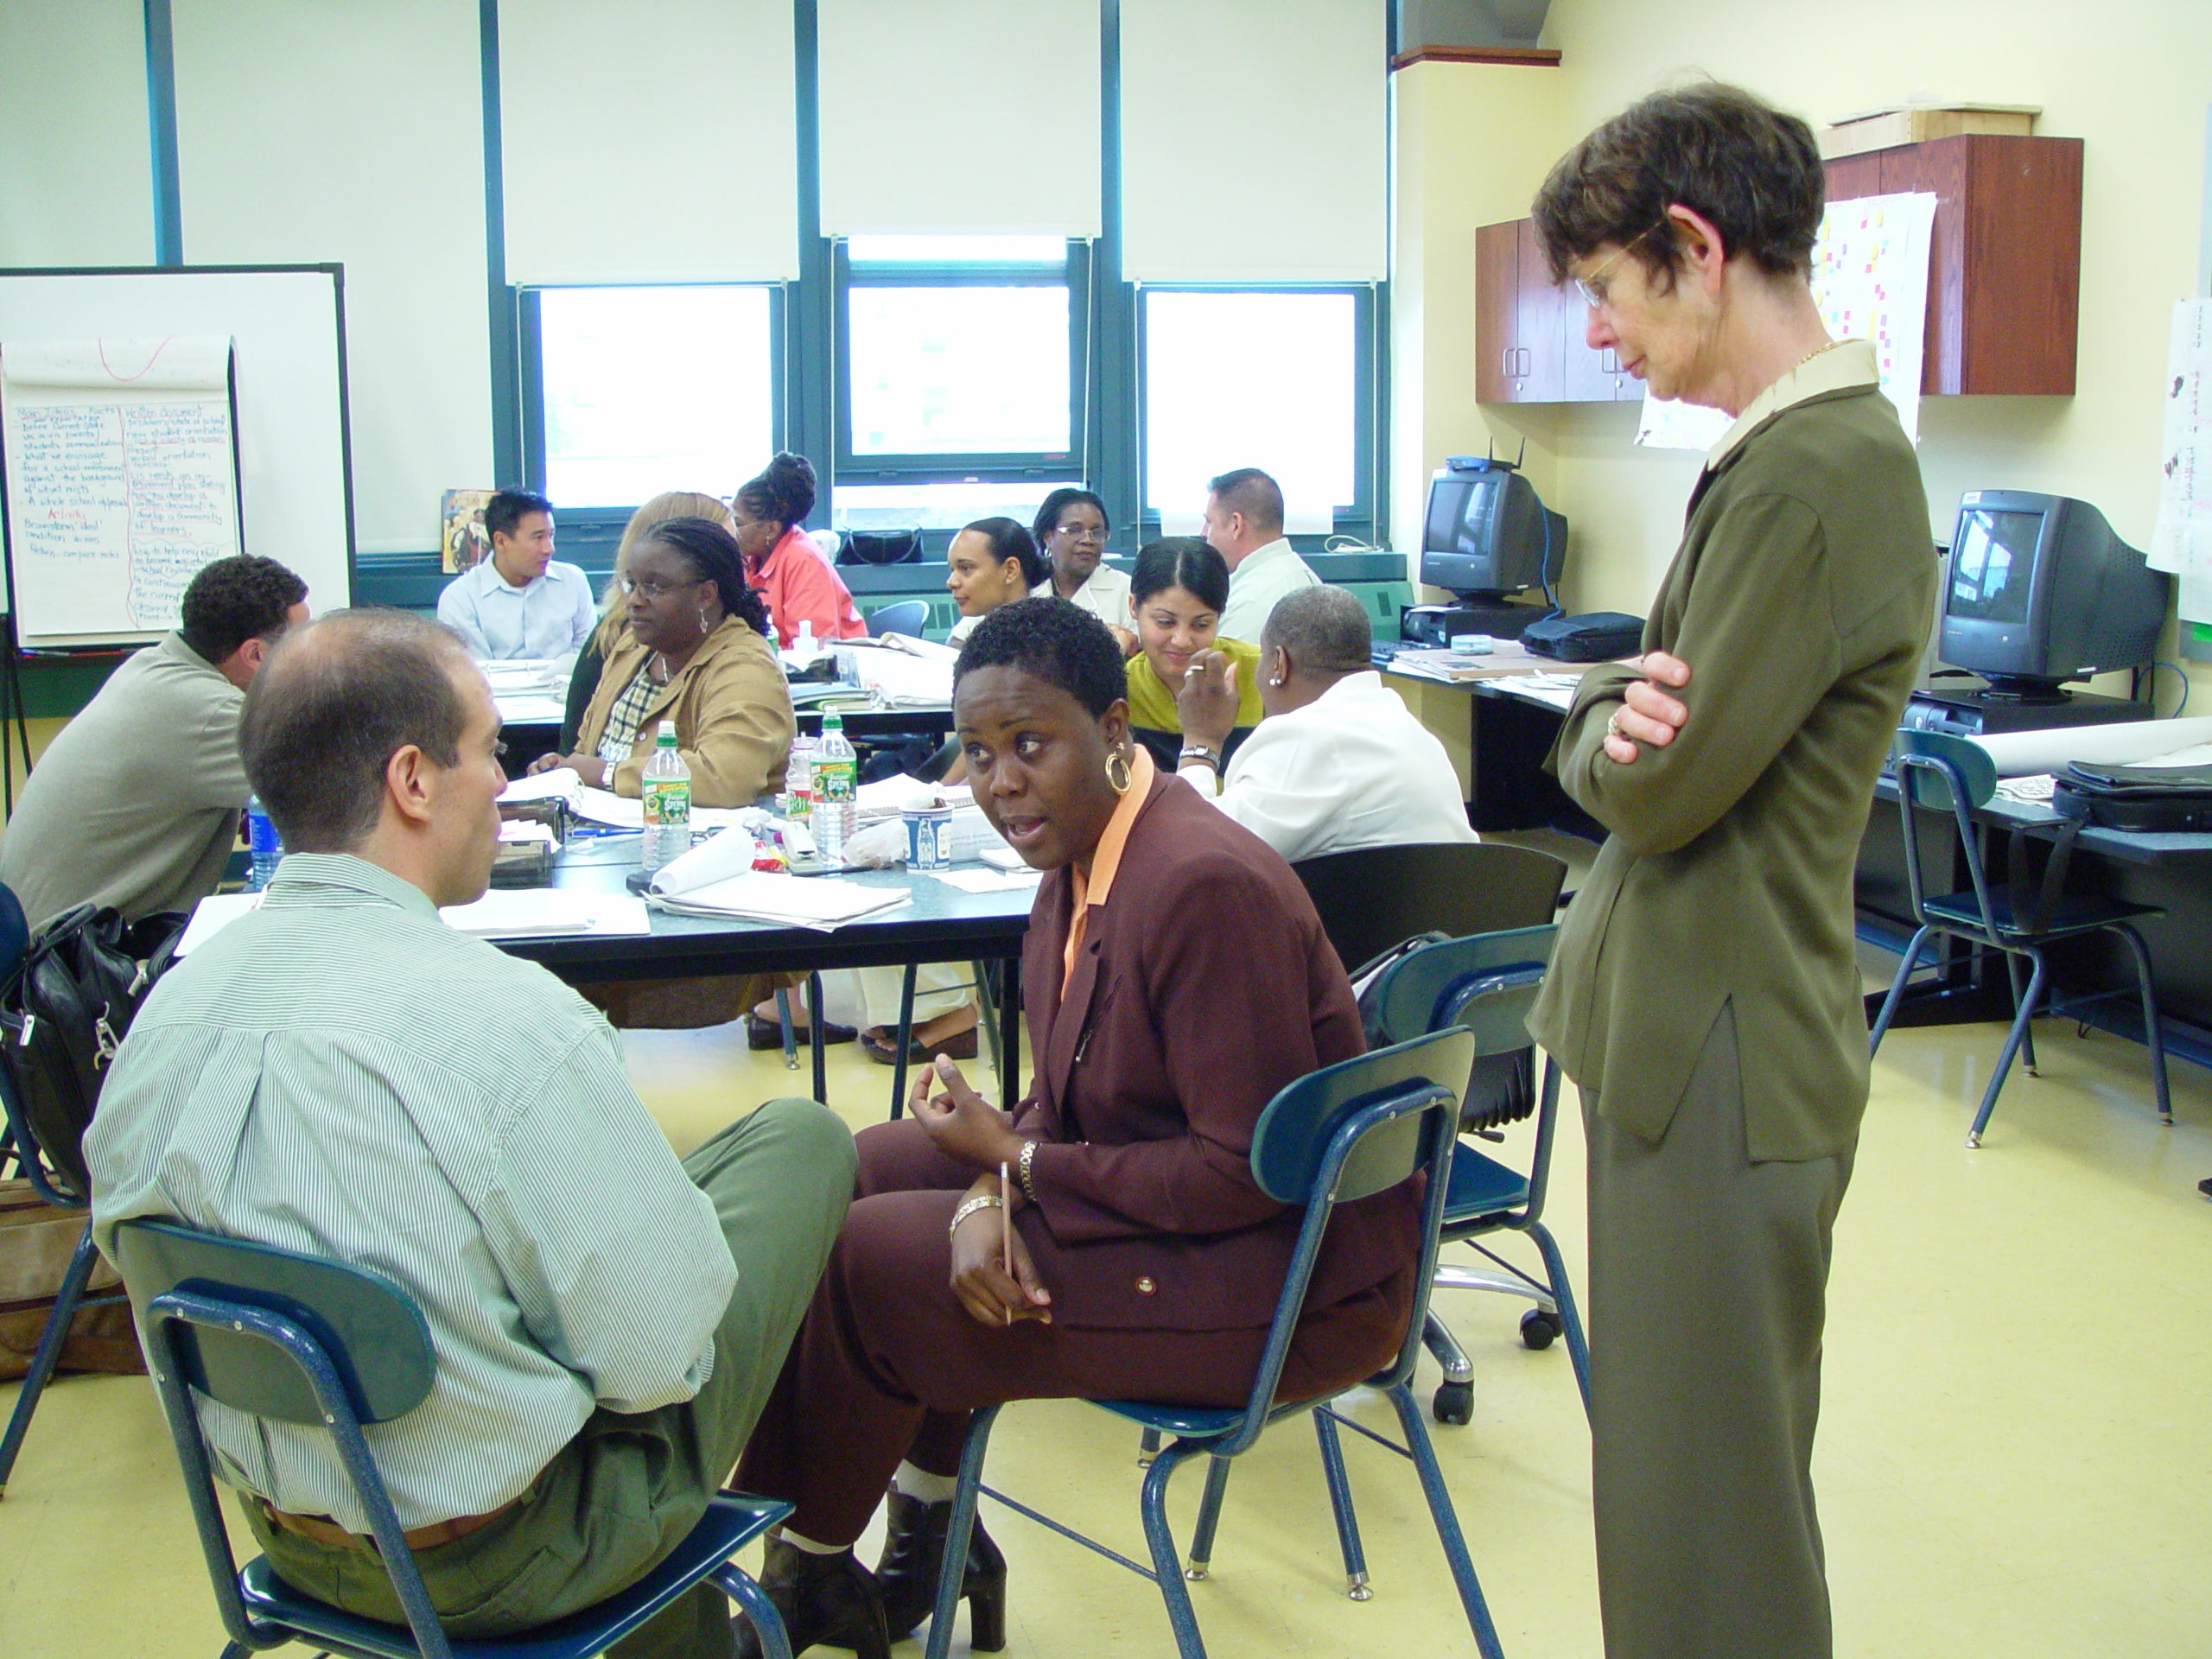 A program that helps train principals around the country offers guidance, based on its approach, to others interested in school leader preparation.